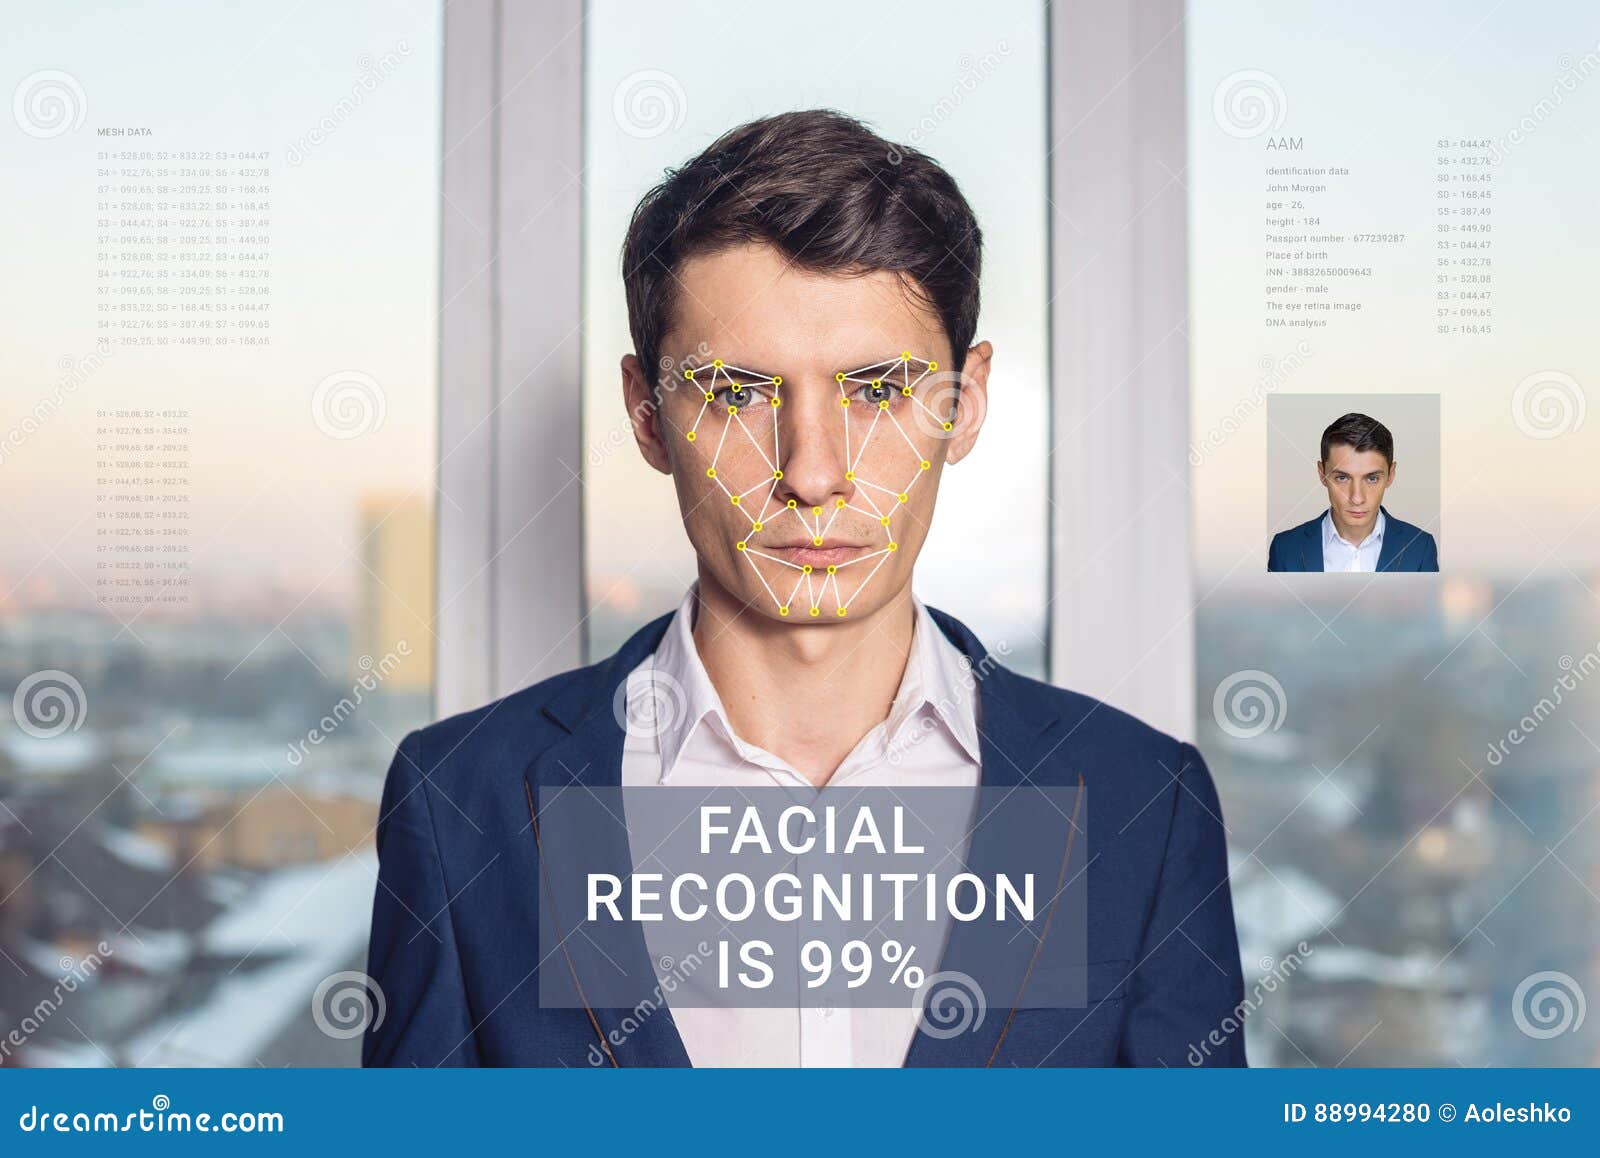 recognition of male face. biometric verification and identification